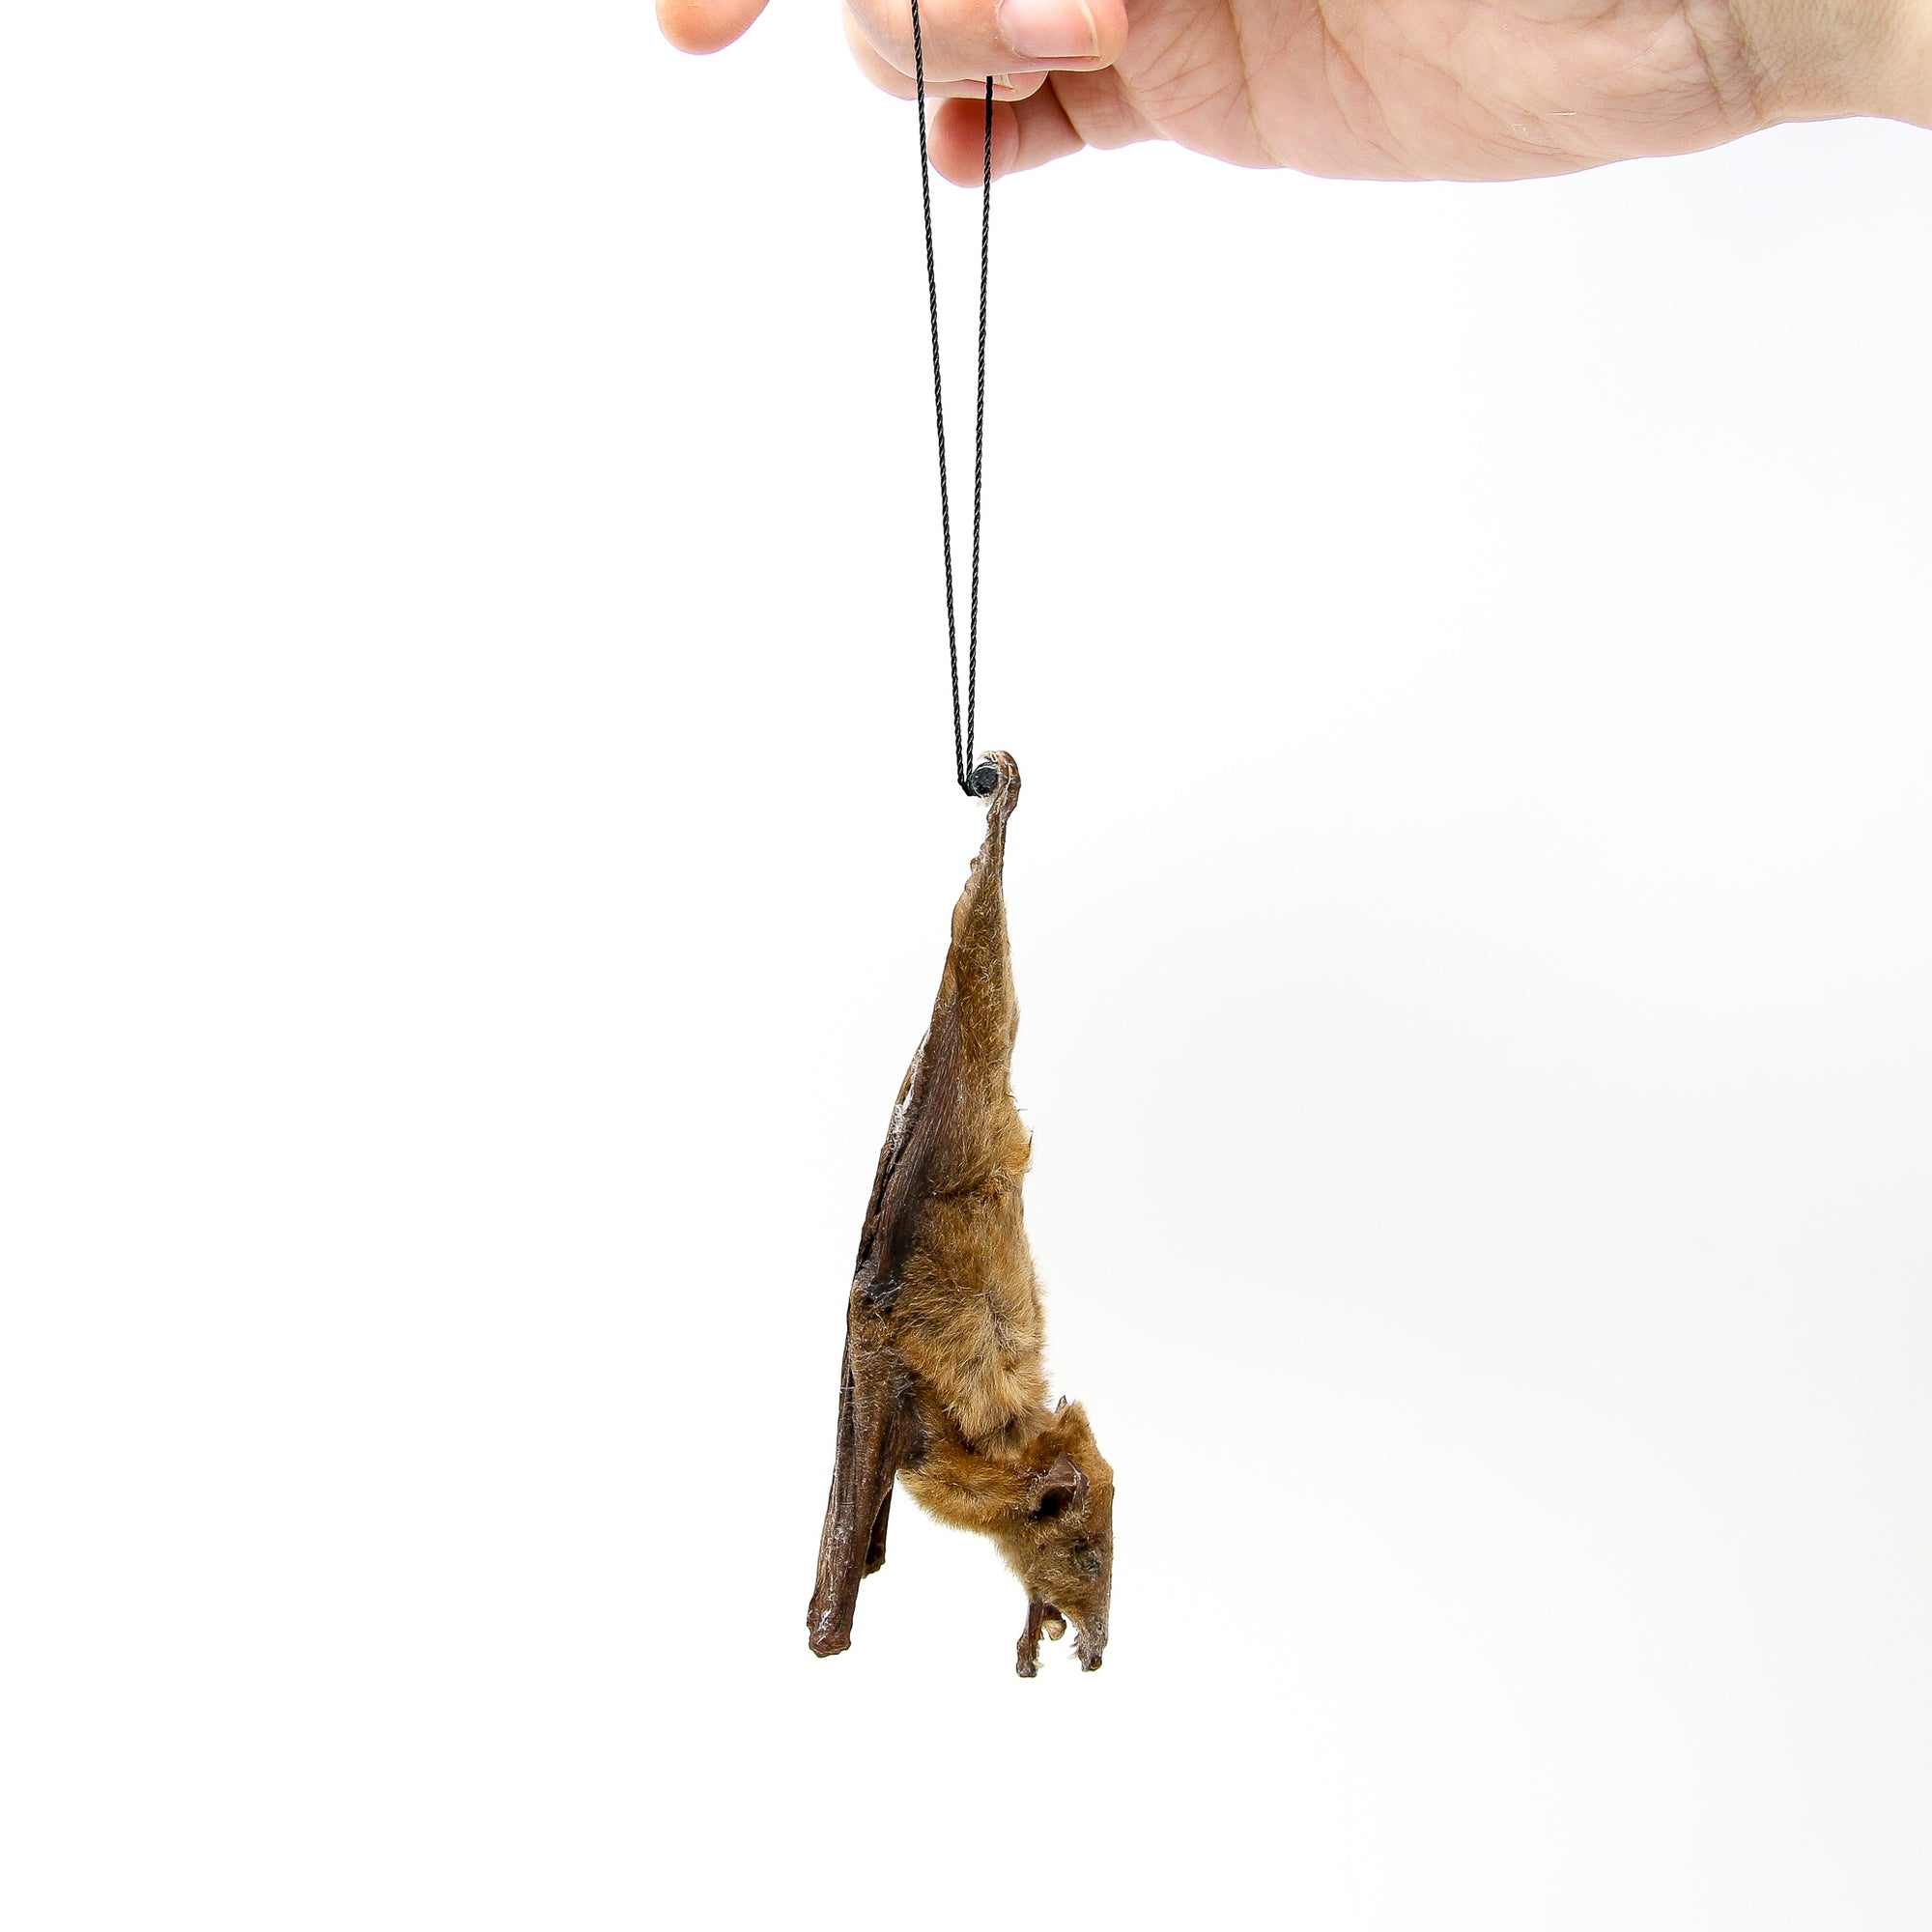 TWO (2) Blossom Fruit Bat (Macroglossus minimus) | A1 Hanging Specimen | Indonesia | Dry-preserved Taxidermy